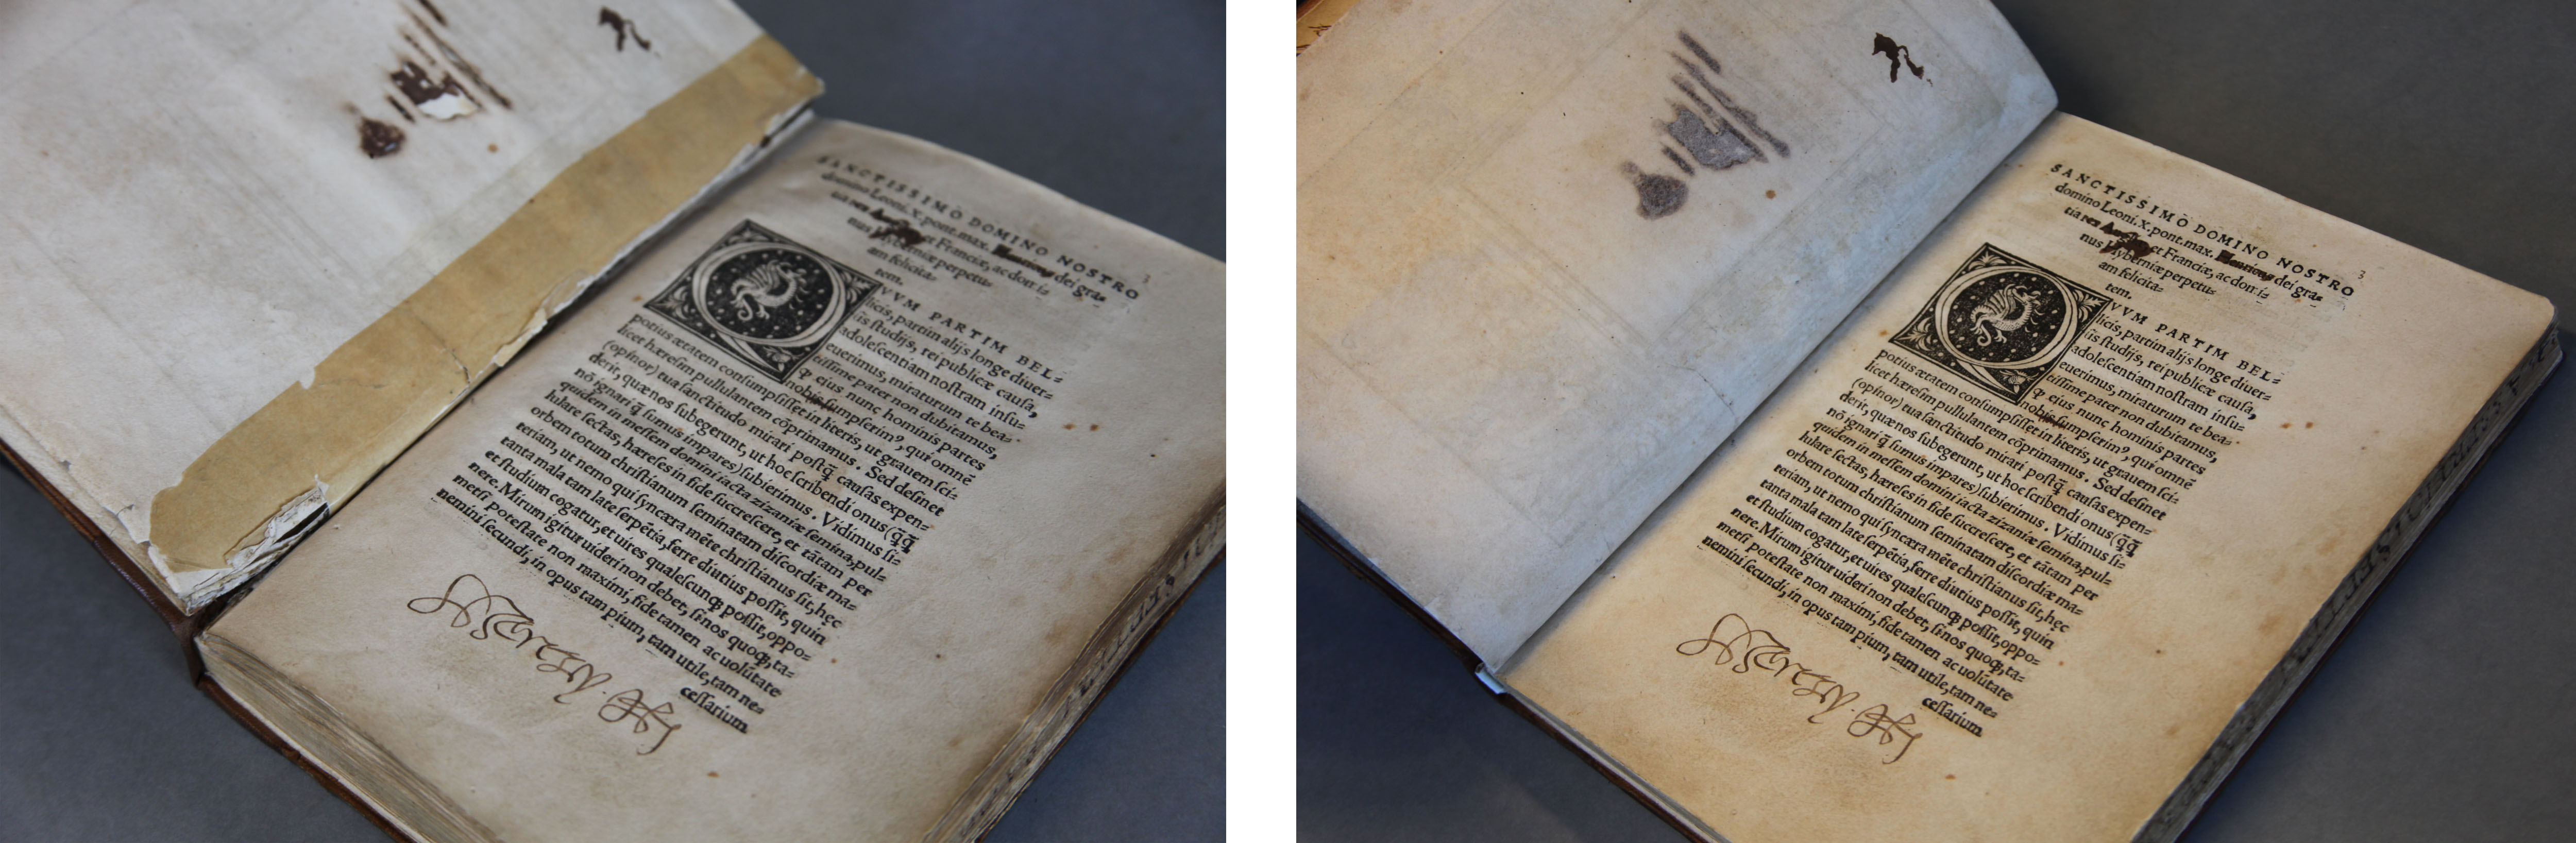 We haven’t finished talking about him… Henry VIII’s book is on the bench for some treatment